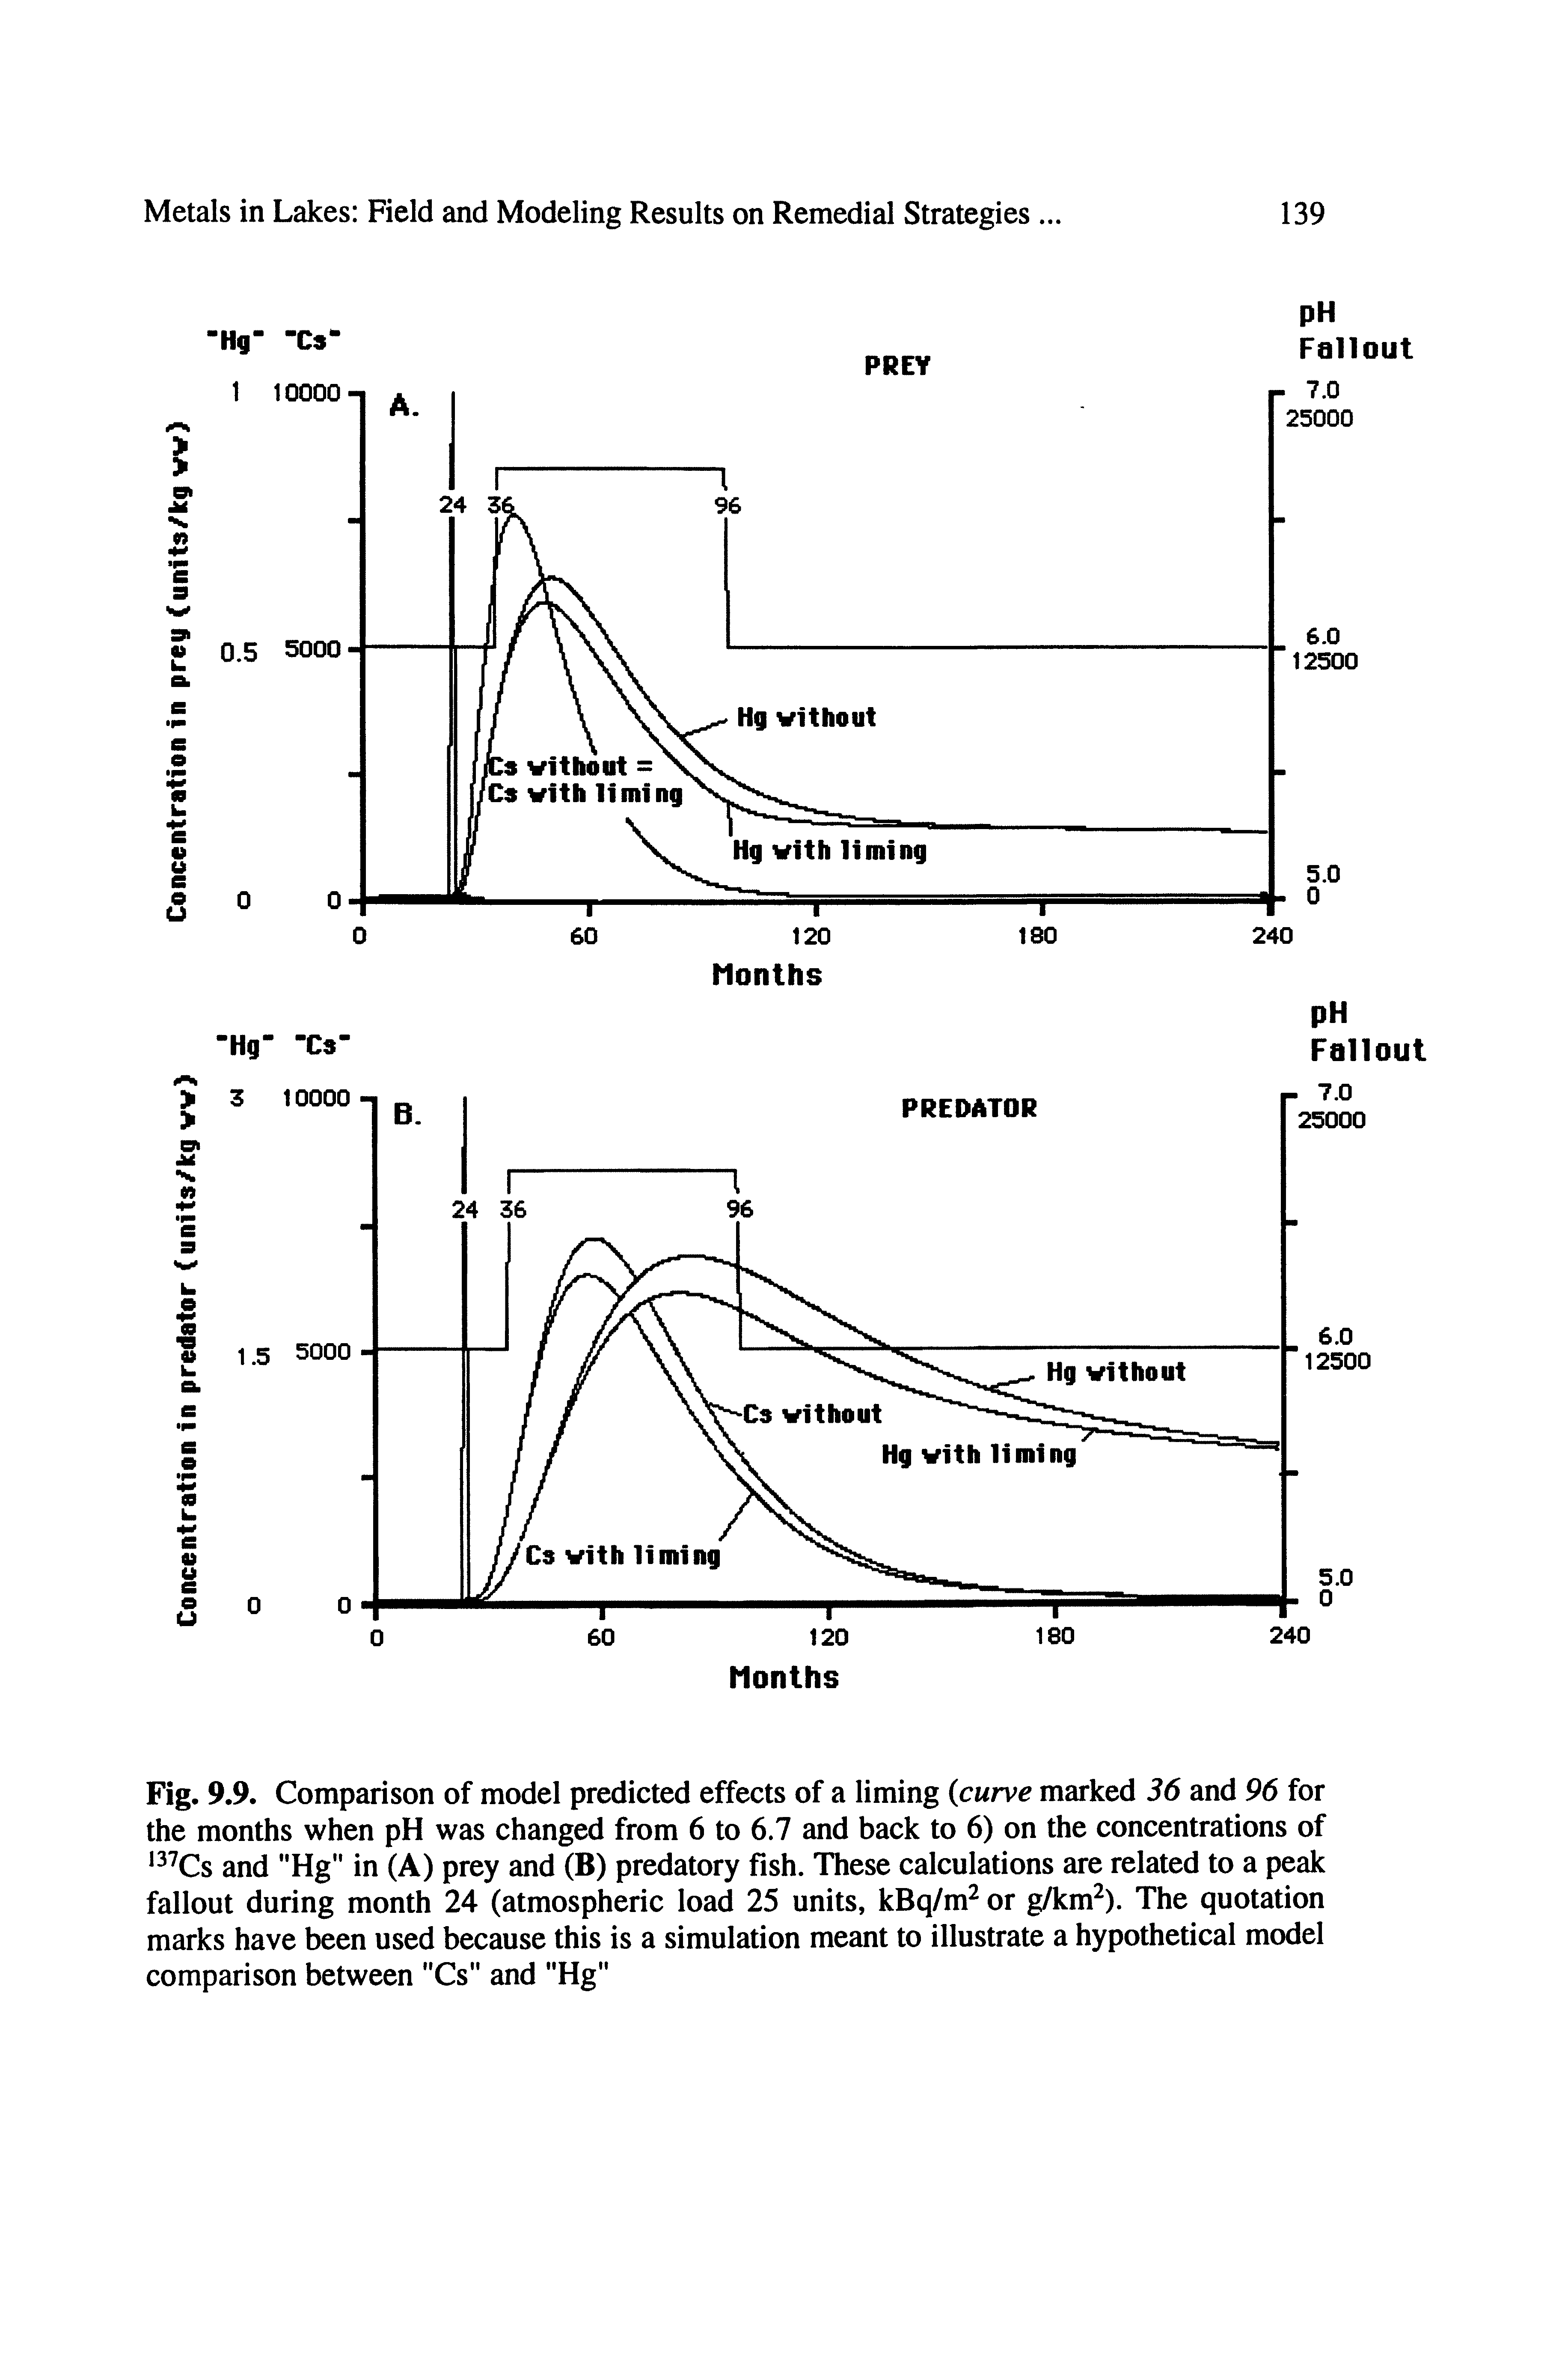 Fig. 9.9. Comparison of model predicted effects of a liming (curve marked 36 and 96 for the months when pH was changed from 6 to 6.7 and back to 6) on the concentrations of 3 Cs and "Hg" in (A) prey and (B) predatory fish. These calculations are related to a peak fallout during month 24 (atmospheric load 25 units, kBq/m or g/km ). The quotation marks have been used because this is a simulation meant to illustrate a hypothetical model comparison between "Cs" and "Hg"...